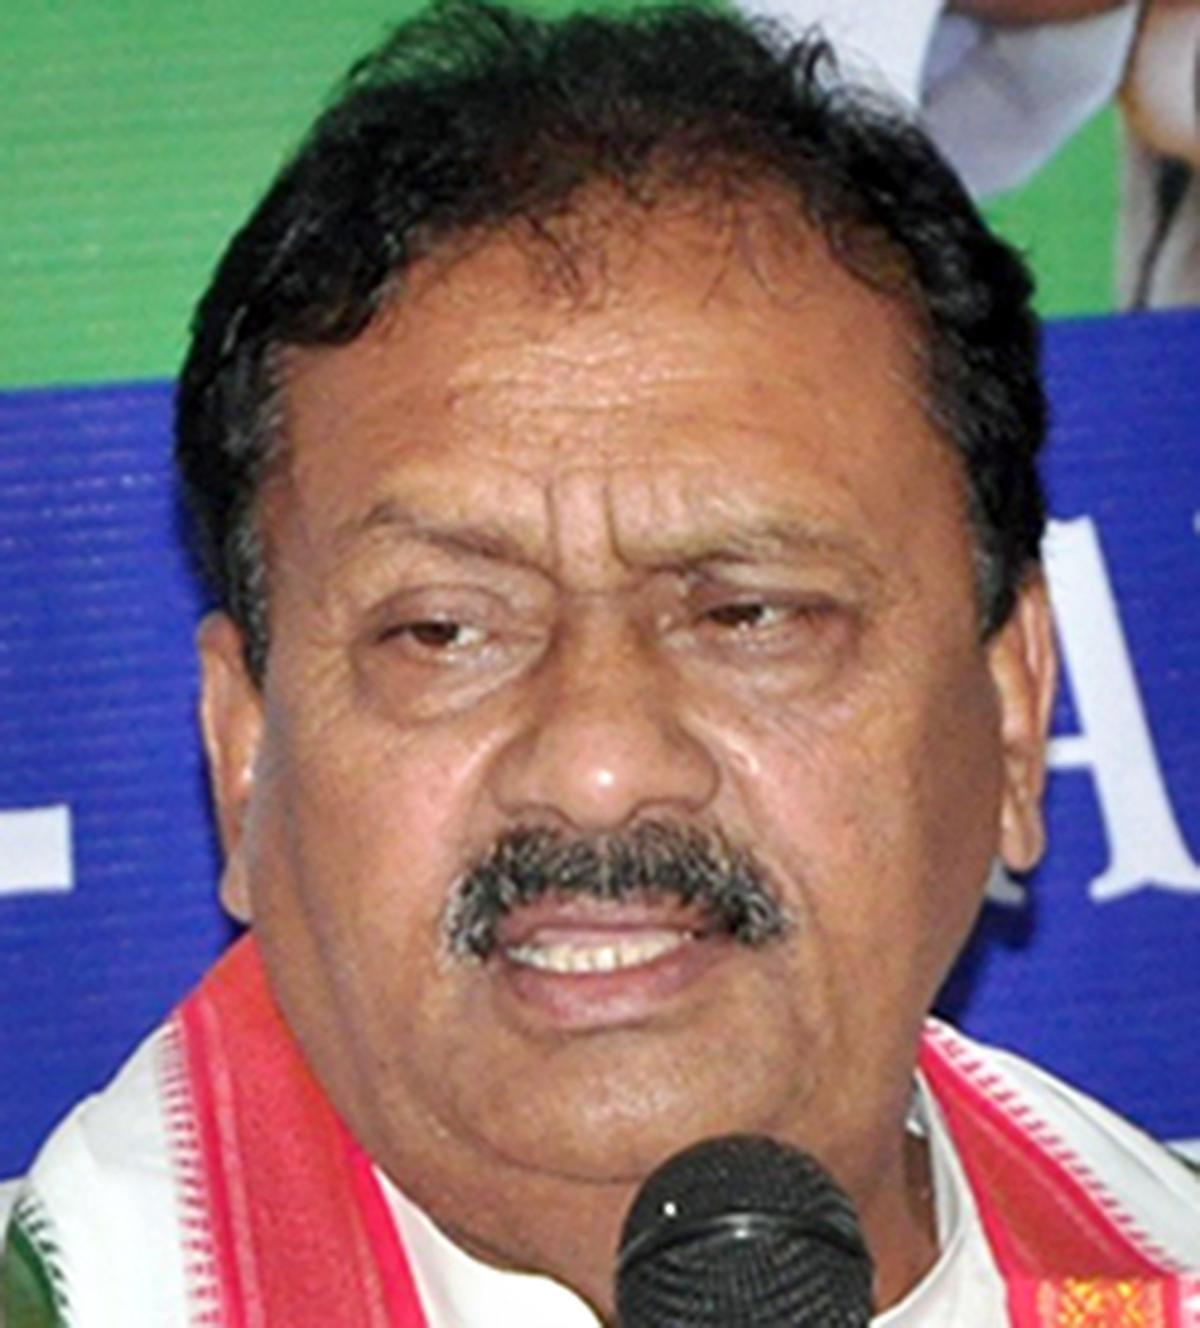 Stop all drama and focus on people’s issues, Cong. tells BJP and TRS